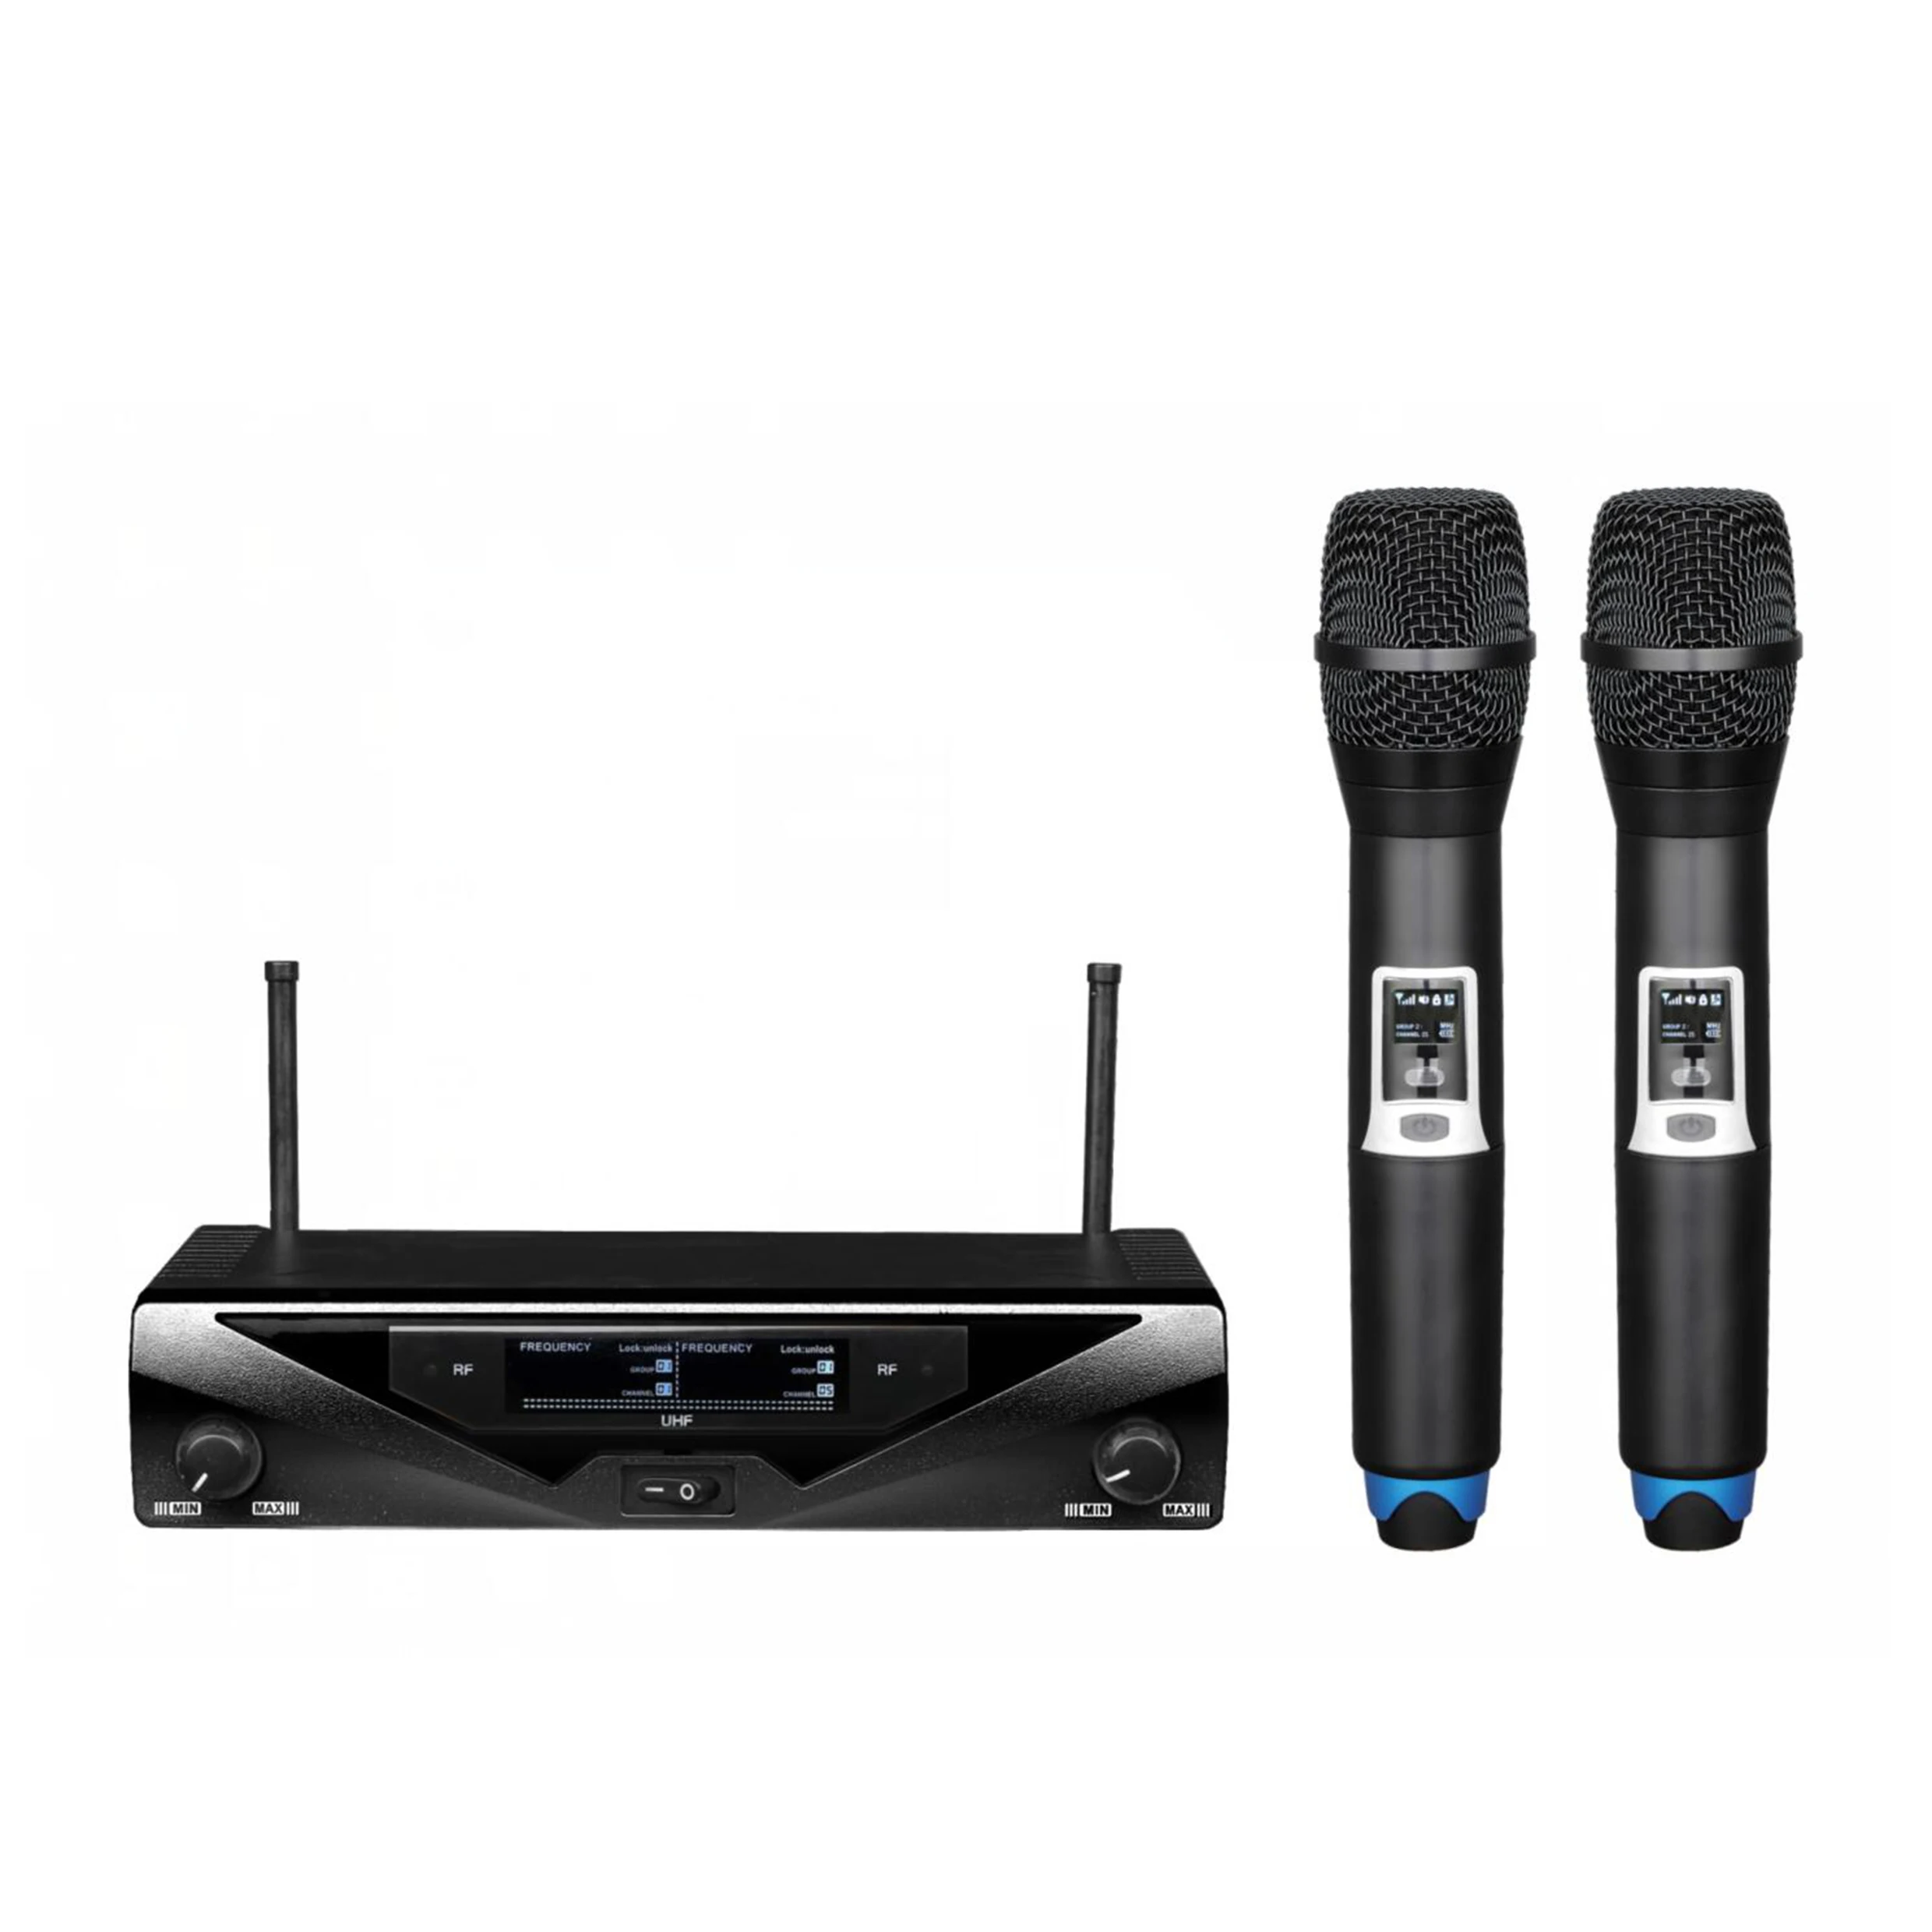 

Accuracy Pro Audio UHF-271B Wireless Mic Handheld Microphone For Karaoke And Stage Performance, Black